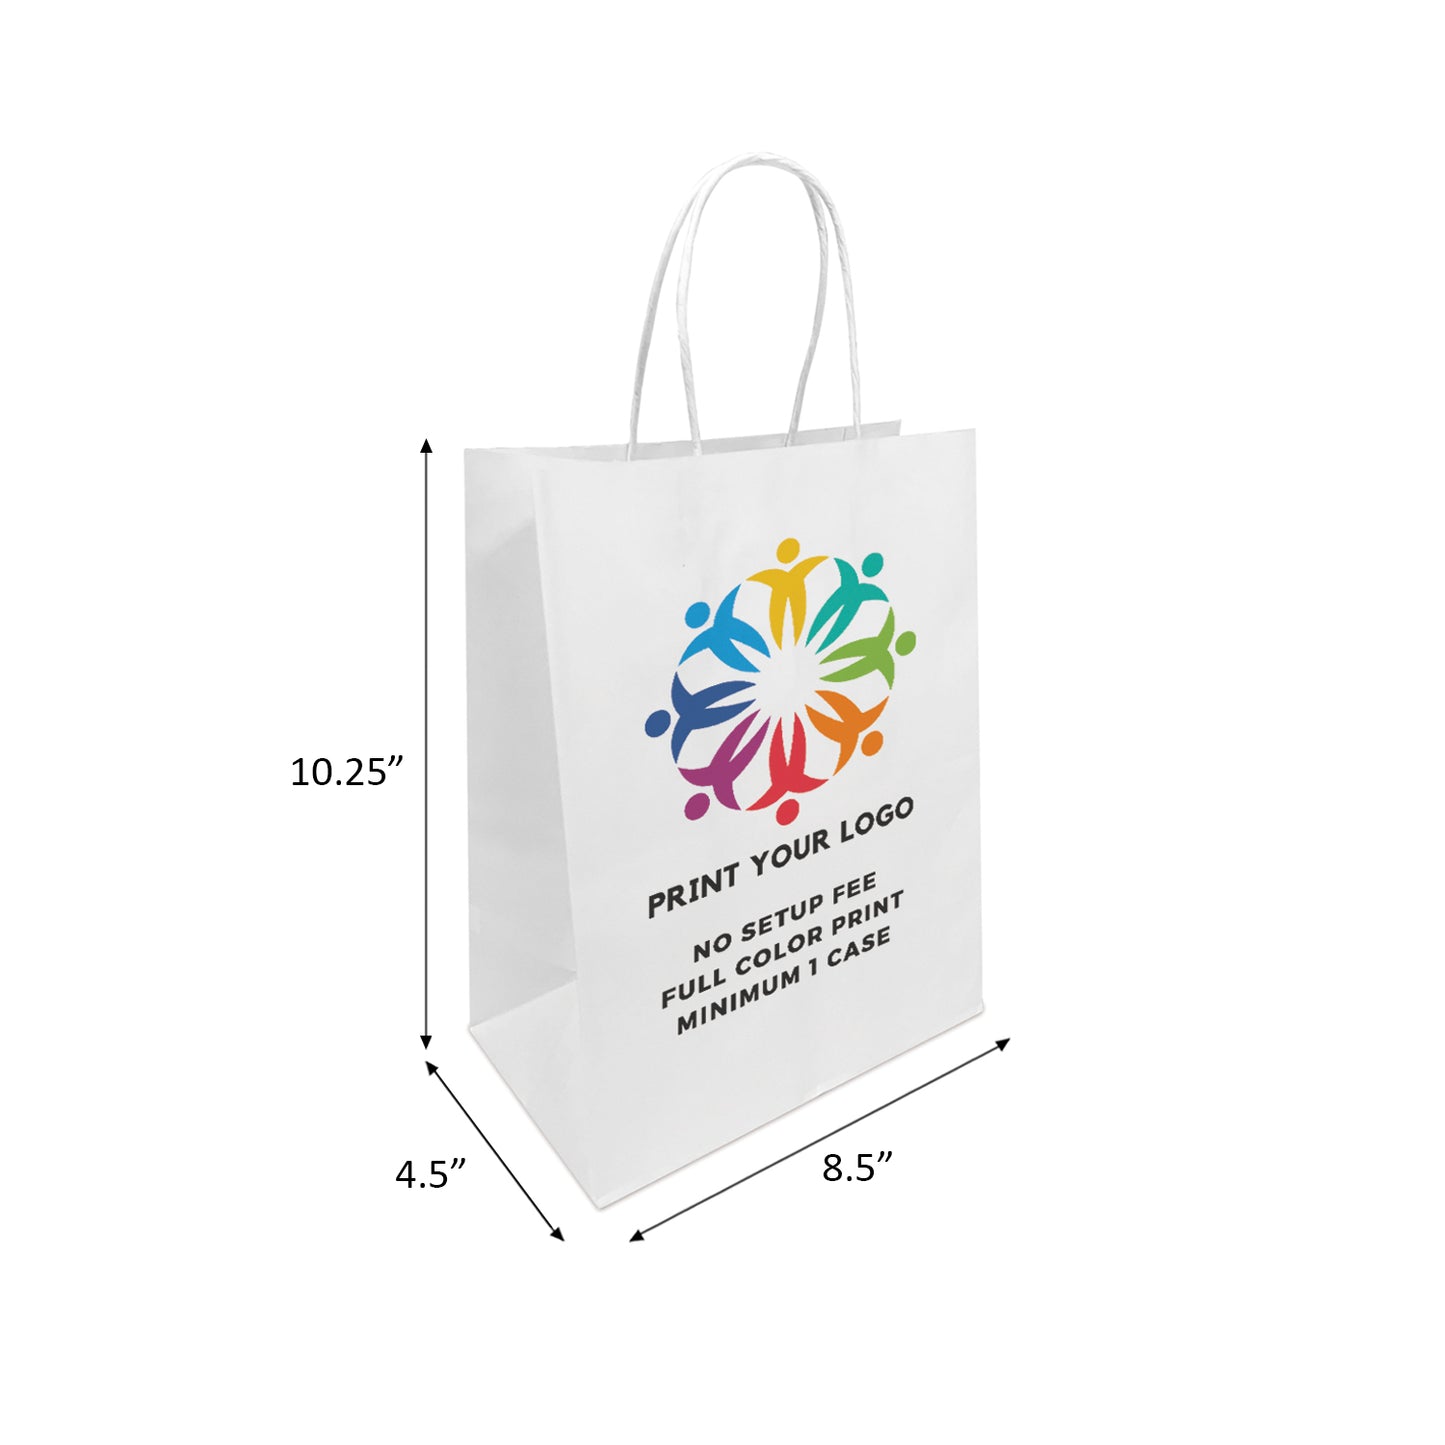 250pcs Cub 8x4.75x10.25 White Paper Bags Twisted Handles; Full Color Custom Print, Printed in Canada